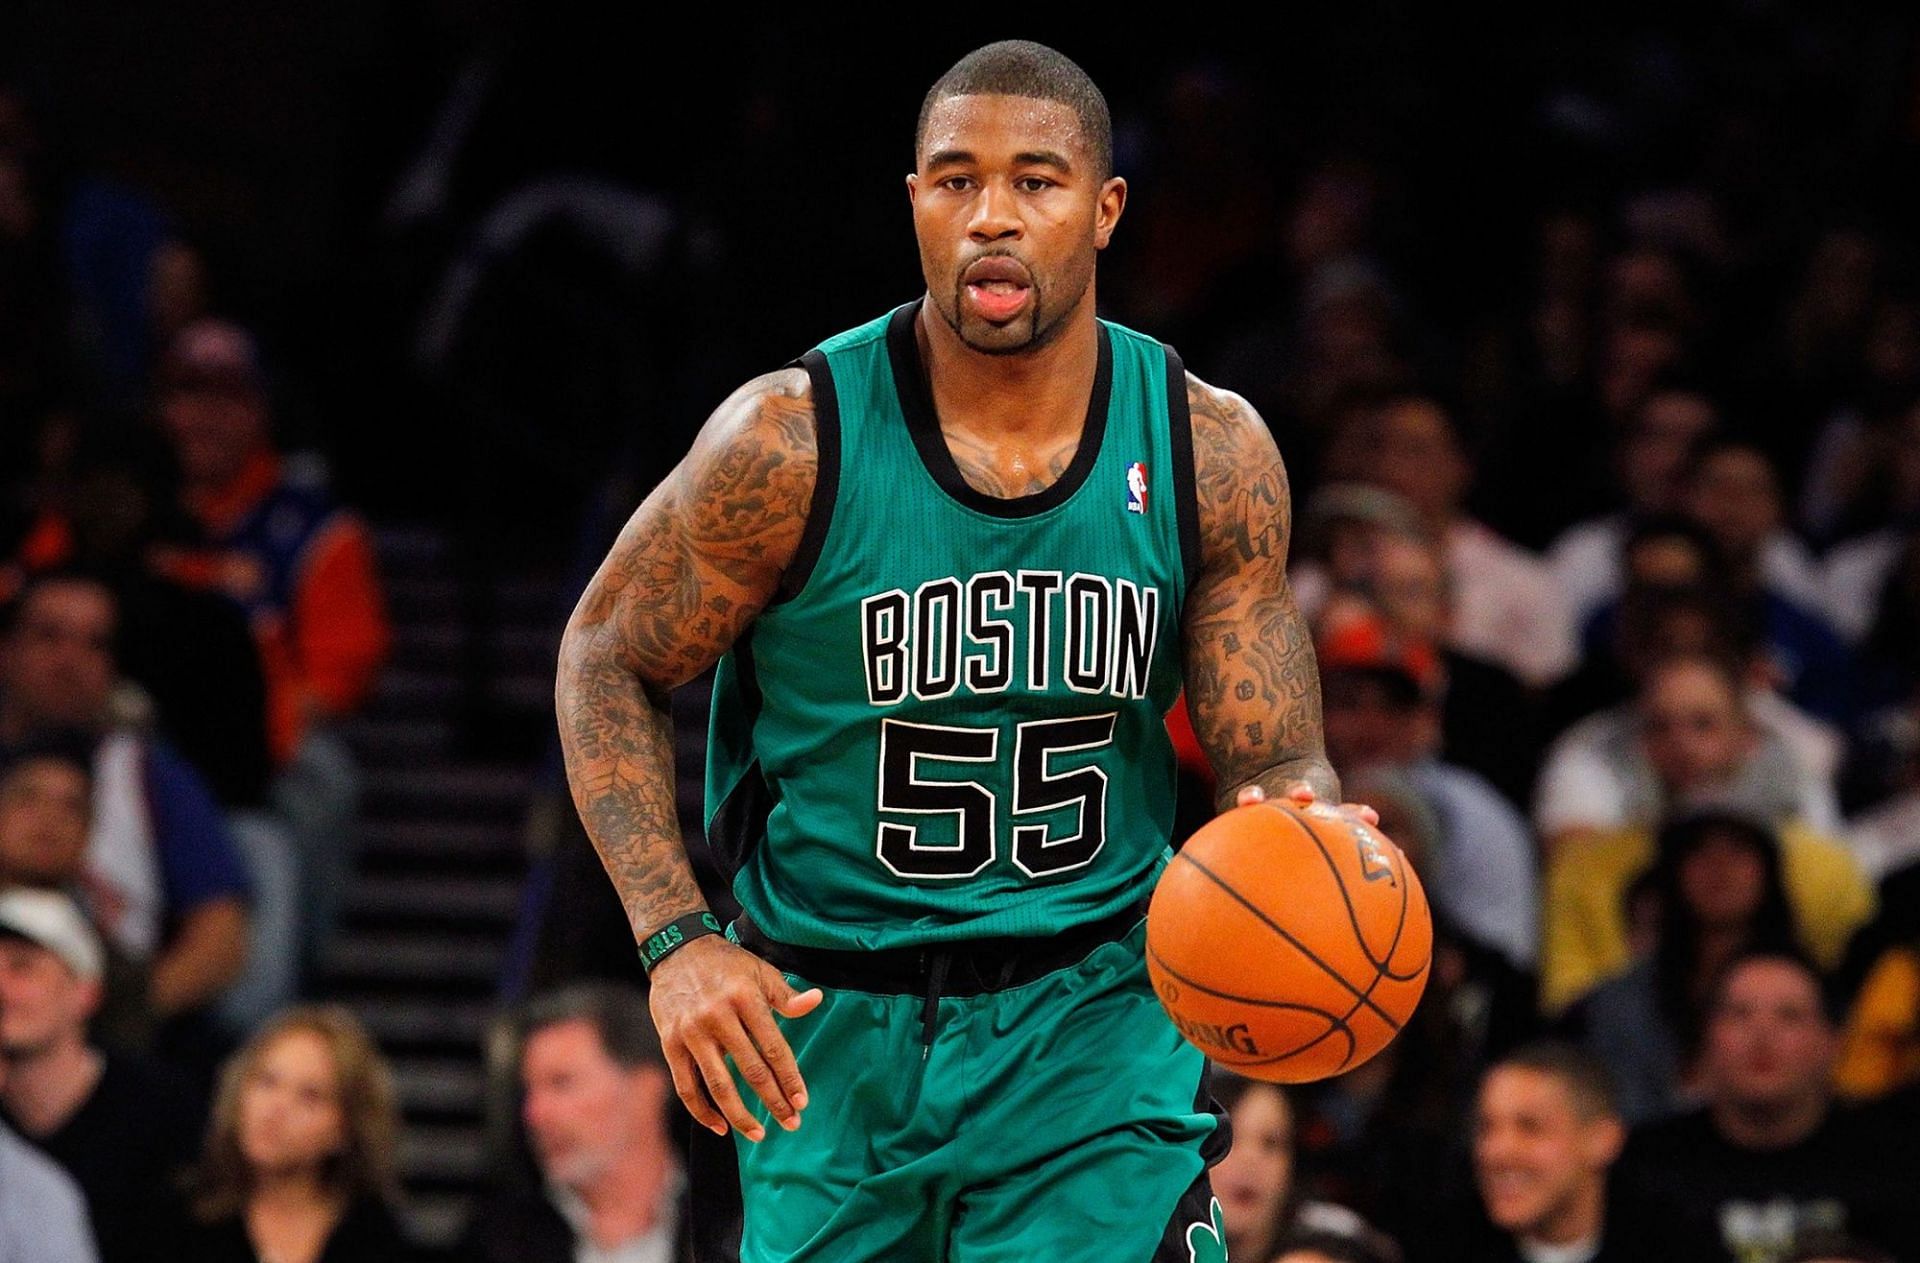 Terrence Williams finished his career with the Boston Celtics